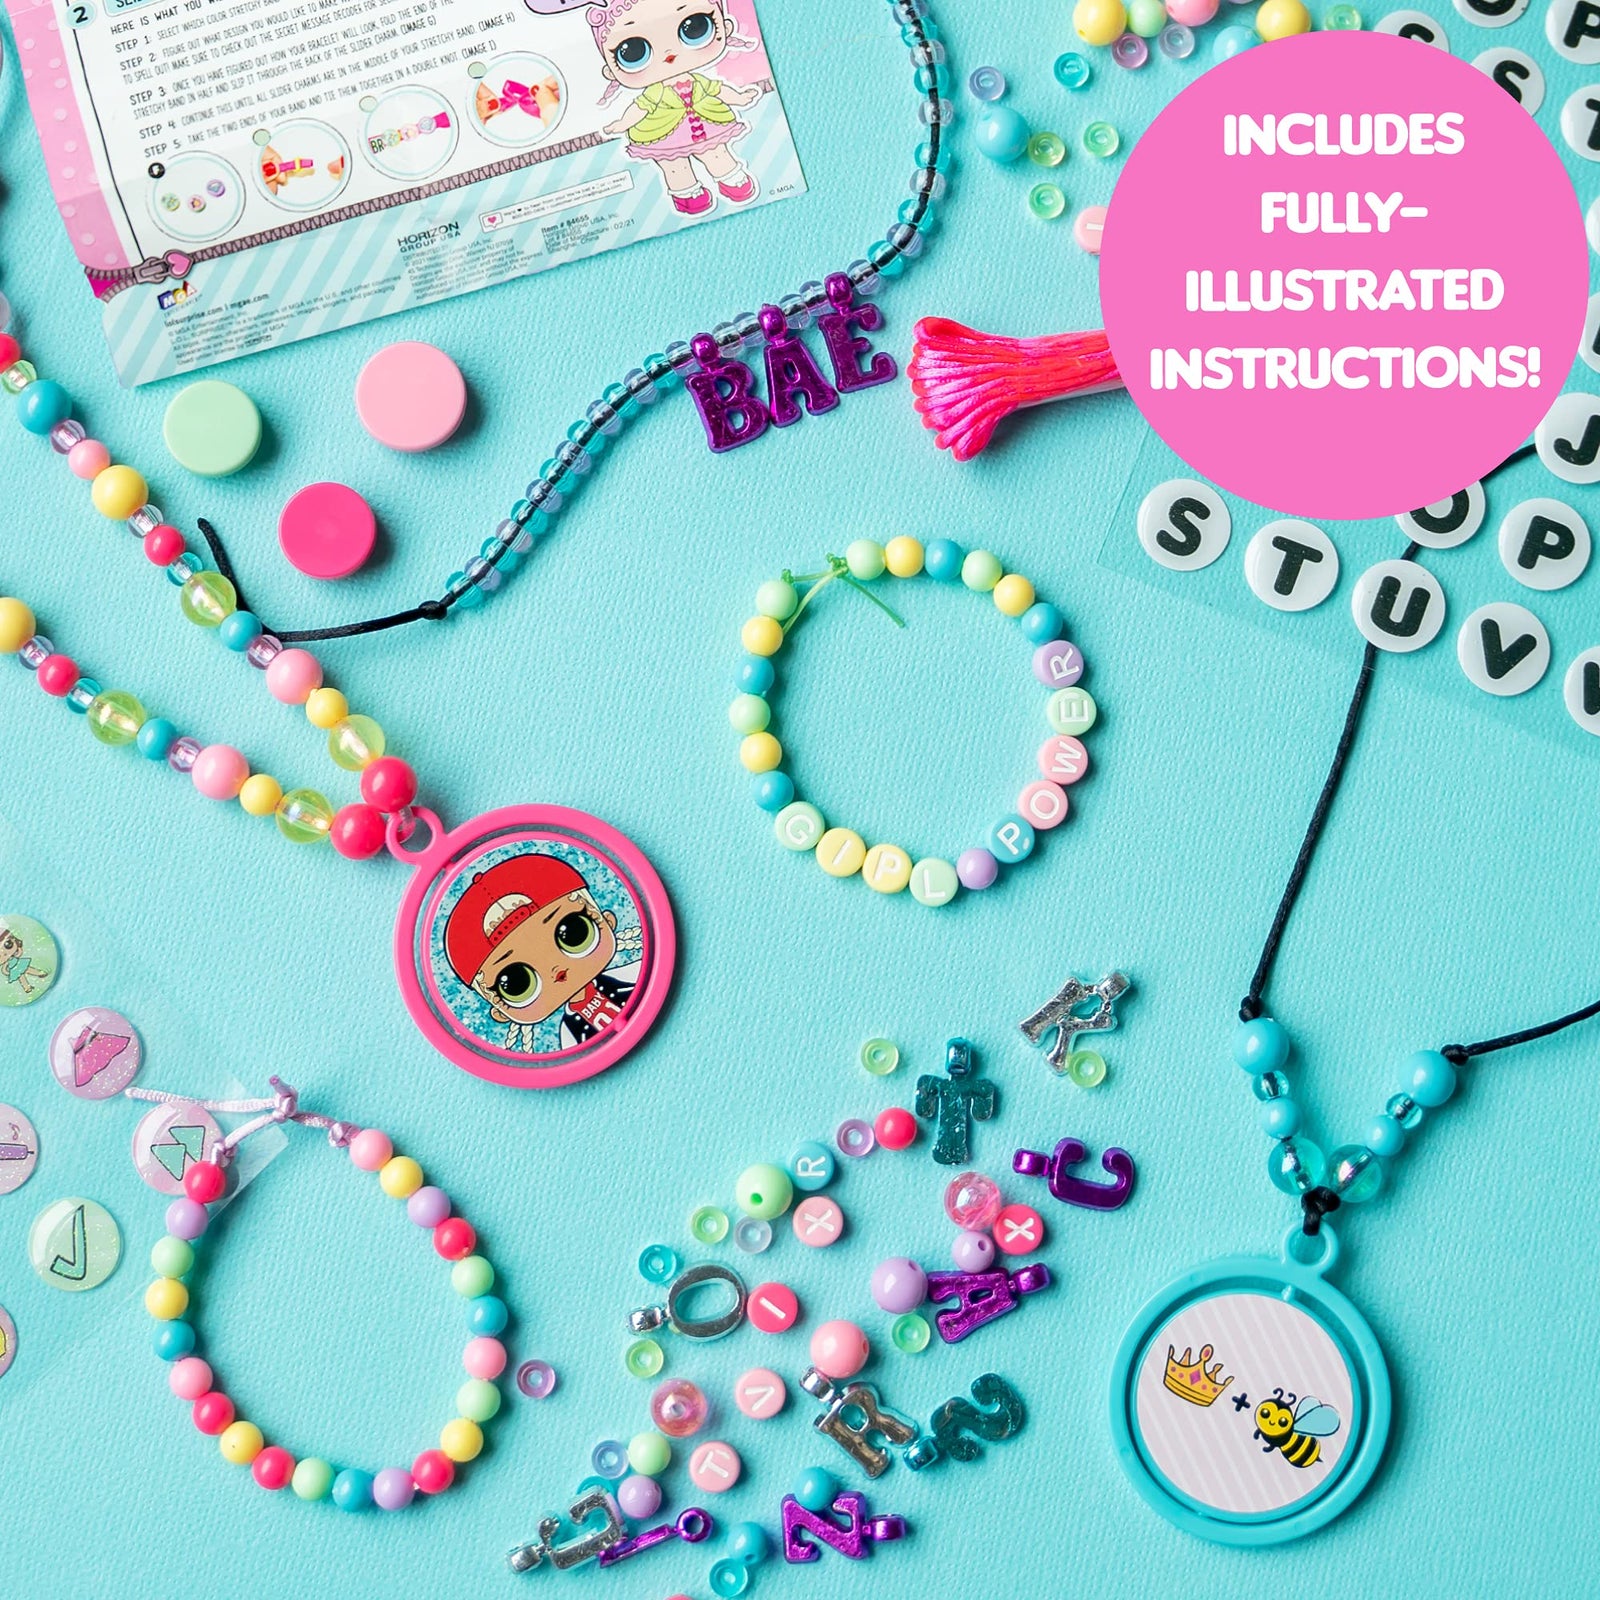 L.O.L. Surprise! Secret Message Jewelry - LOL Dolls DIY Jewelry Making Craft Kit - Create Bracelets & Accessories with 400+ Beads & Charms, Sticker Sheets, Secret Decoder & More - Great Gift for Girls